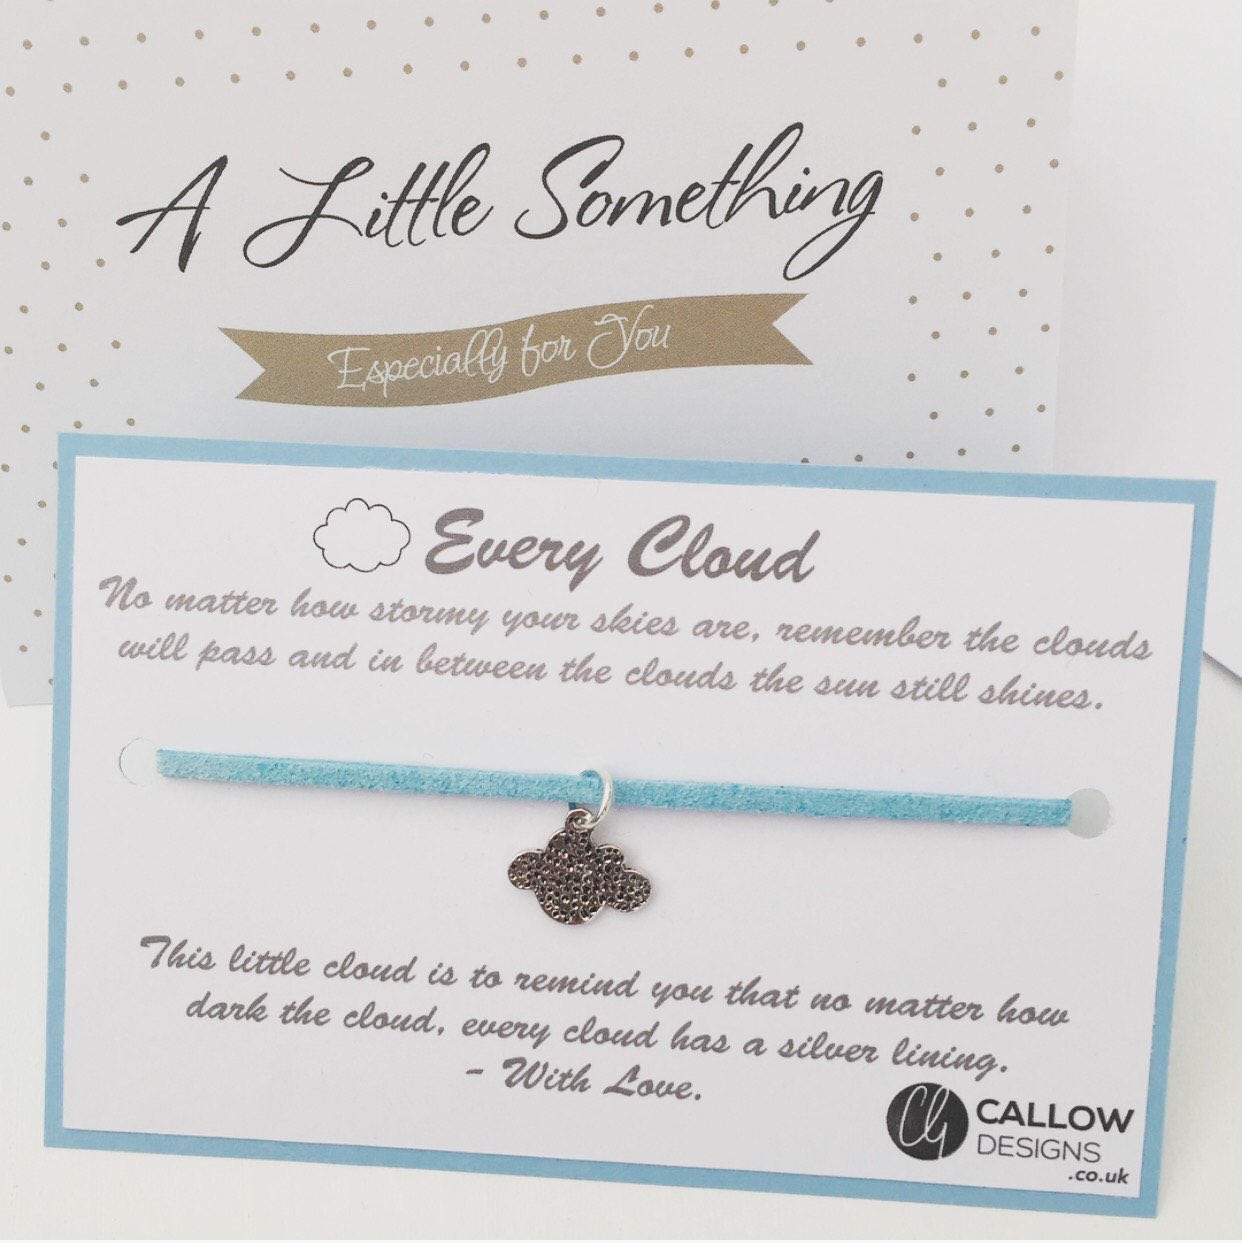 Every Cloud has a Silver Lining Meaning Quote Charm Bracelet